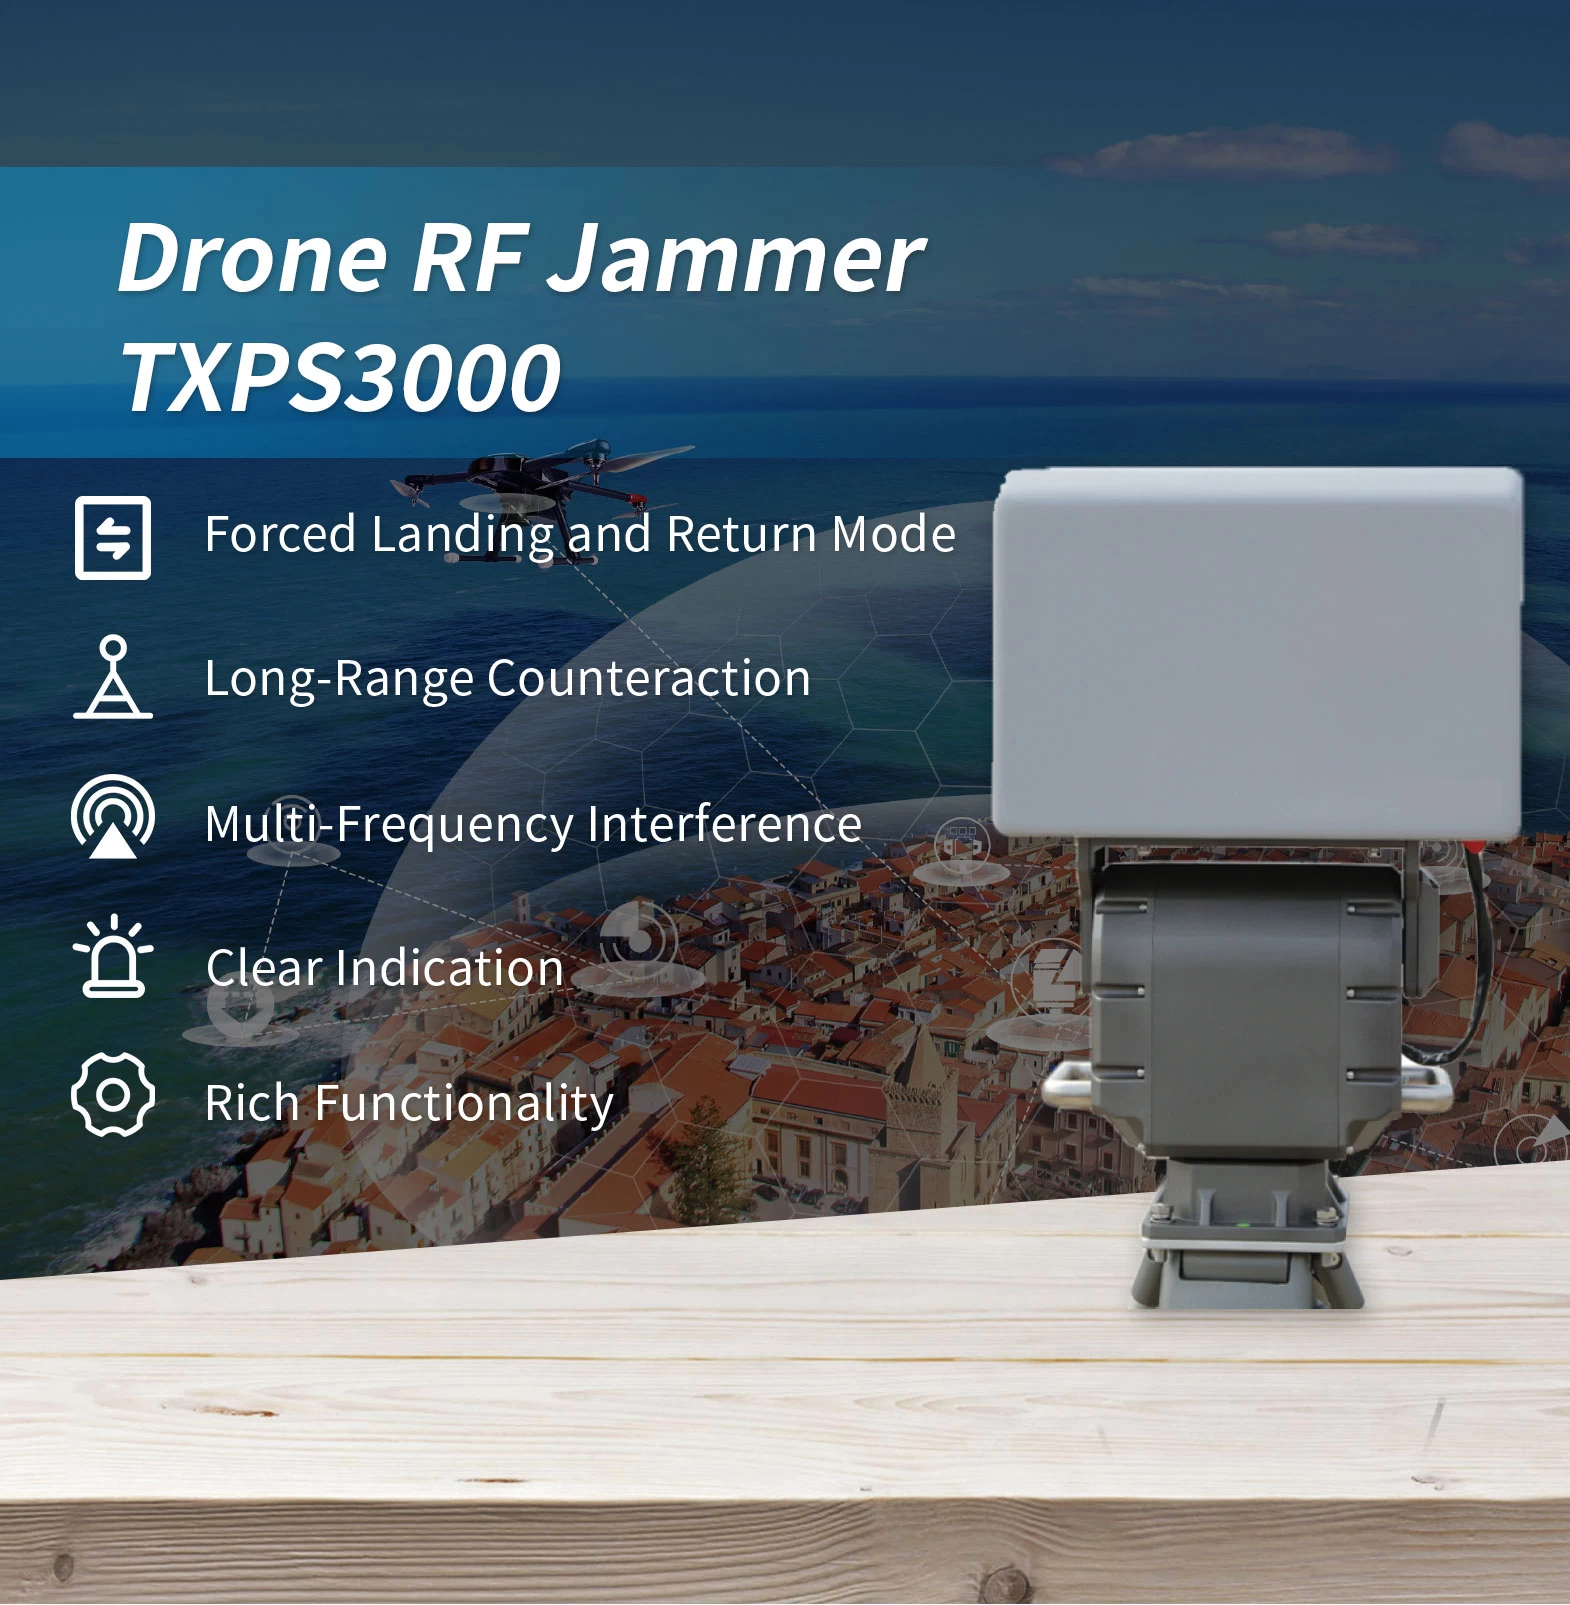 Drone RF Jammer TXPS3000 - Drone Defense - 1